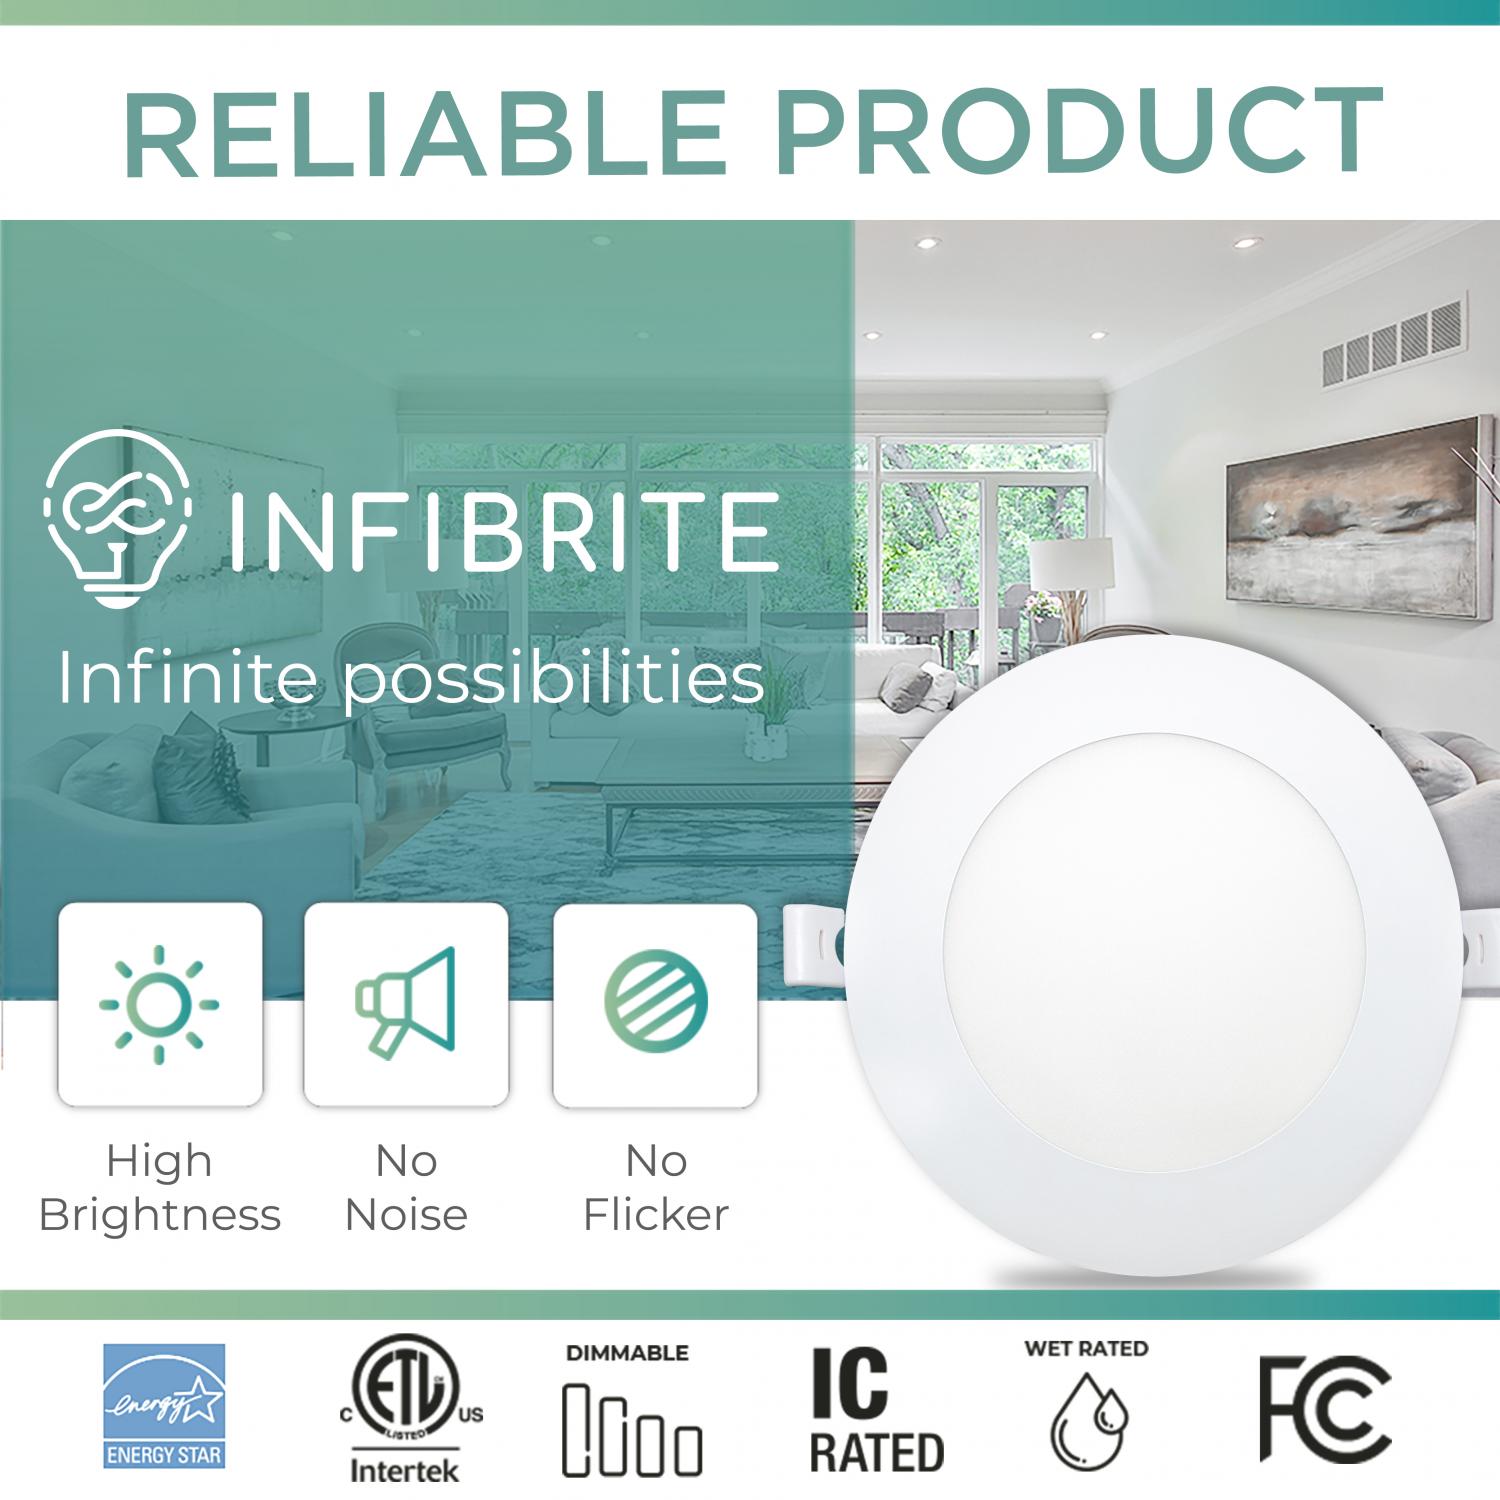 Infibrite 6 Inch 6000K Clear White 12W 1050LM Ultra-Slim LED Ceiling Light with Junction Box, Flush Mount, Dimmable, Fixture for Bedroom, Wet Rated for Bathroom, Easy Install, 110W Eqv, ETL & Energy Star, US Company (12 Pack)